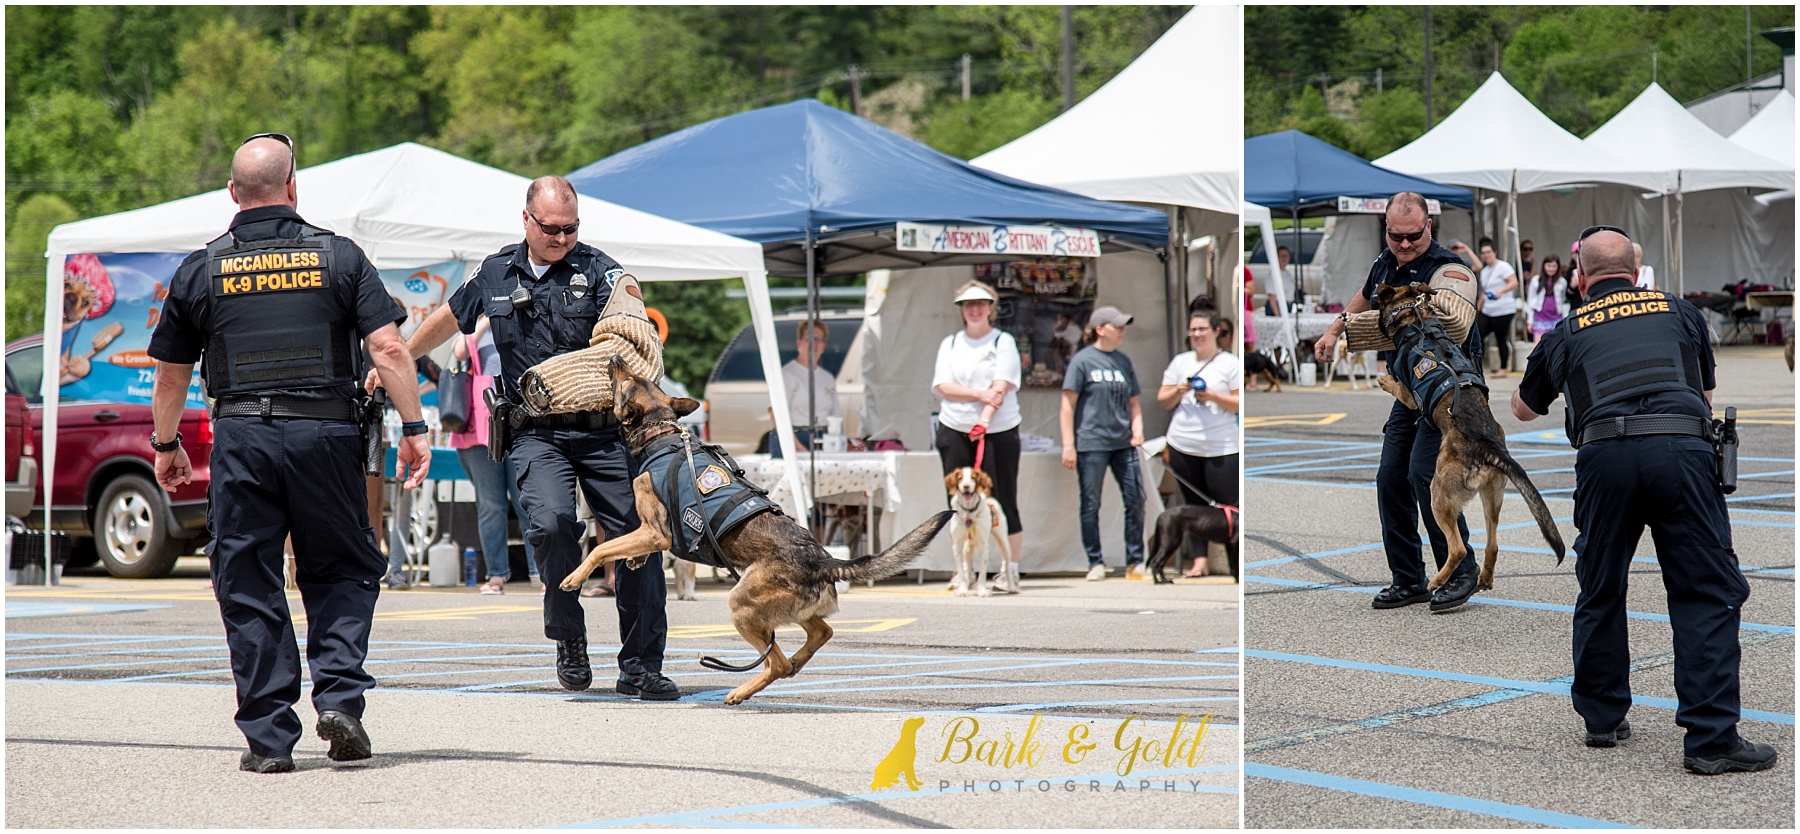 McCandless Police k9 officer performing a bite during Healthy Pet Day 2018